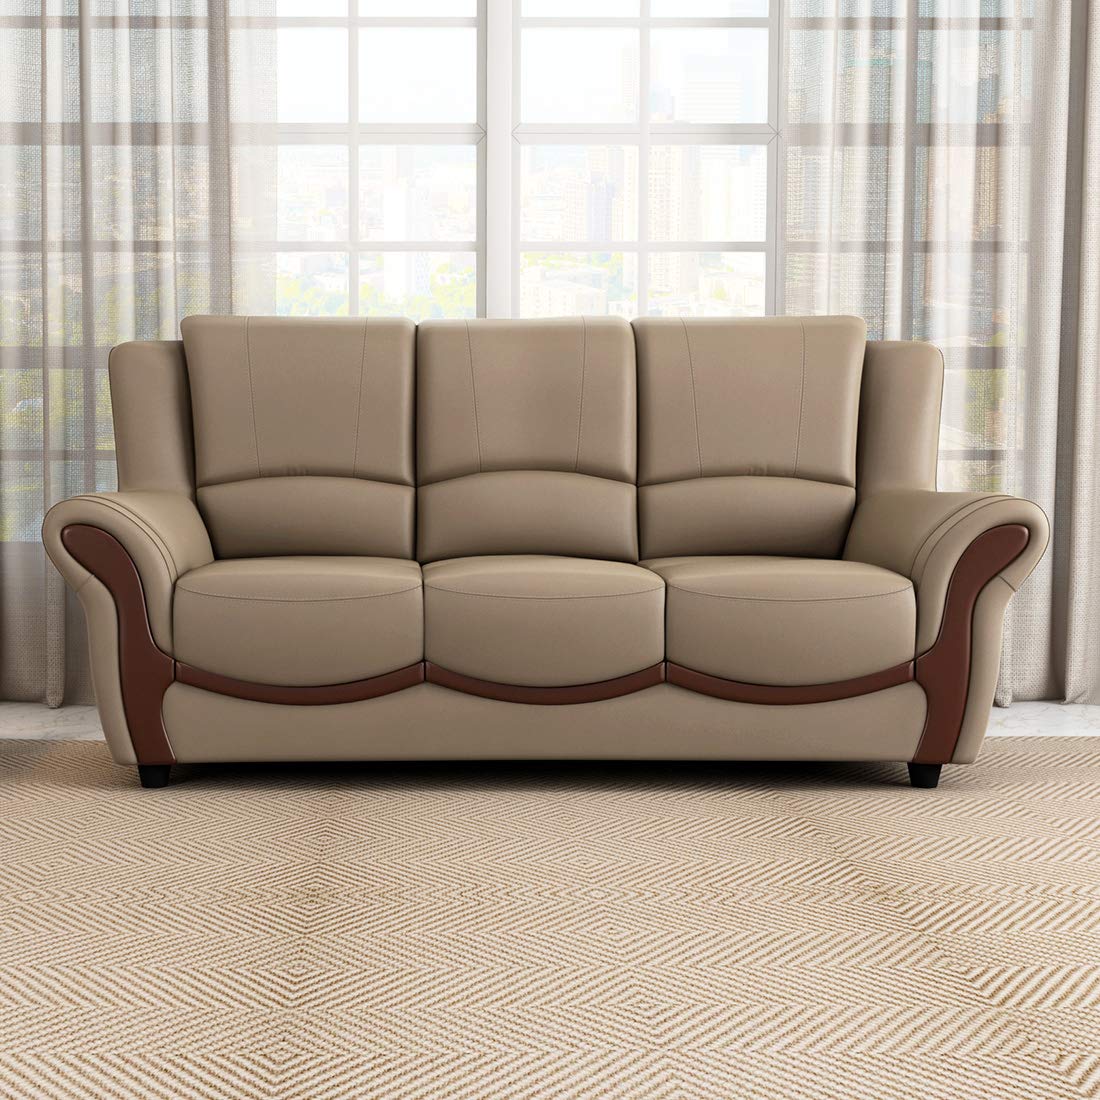 Durian Blos Leatherette 3 Seater Sofa (Brown) (BLOS/37930/G/3)